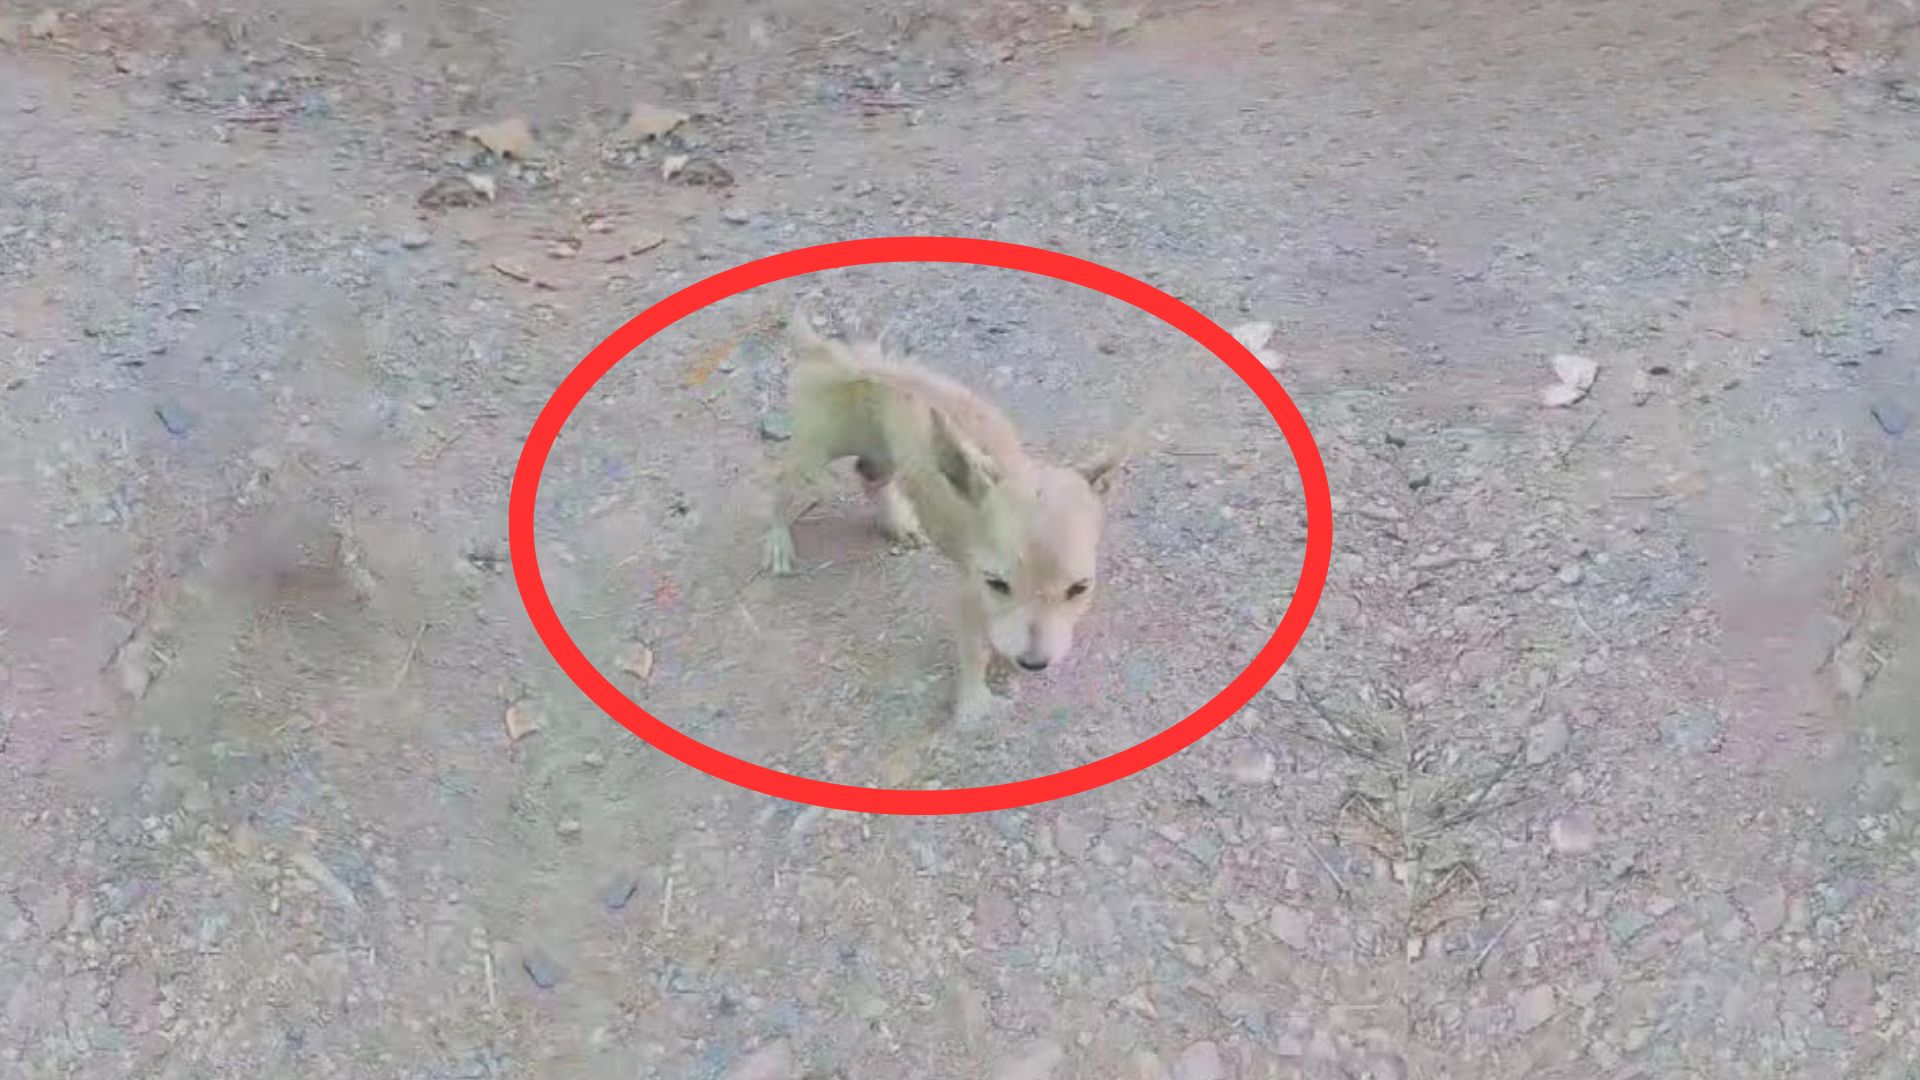 Severely Malnourished Puppy Dumped On The Streets Makes An Incredible Transformation